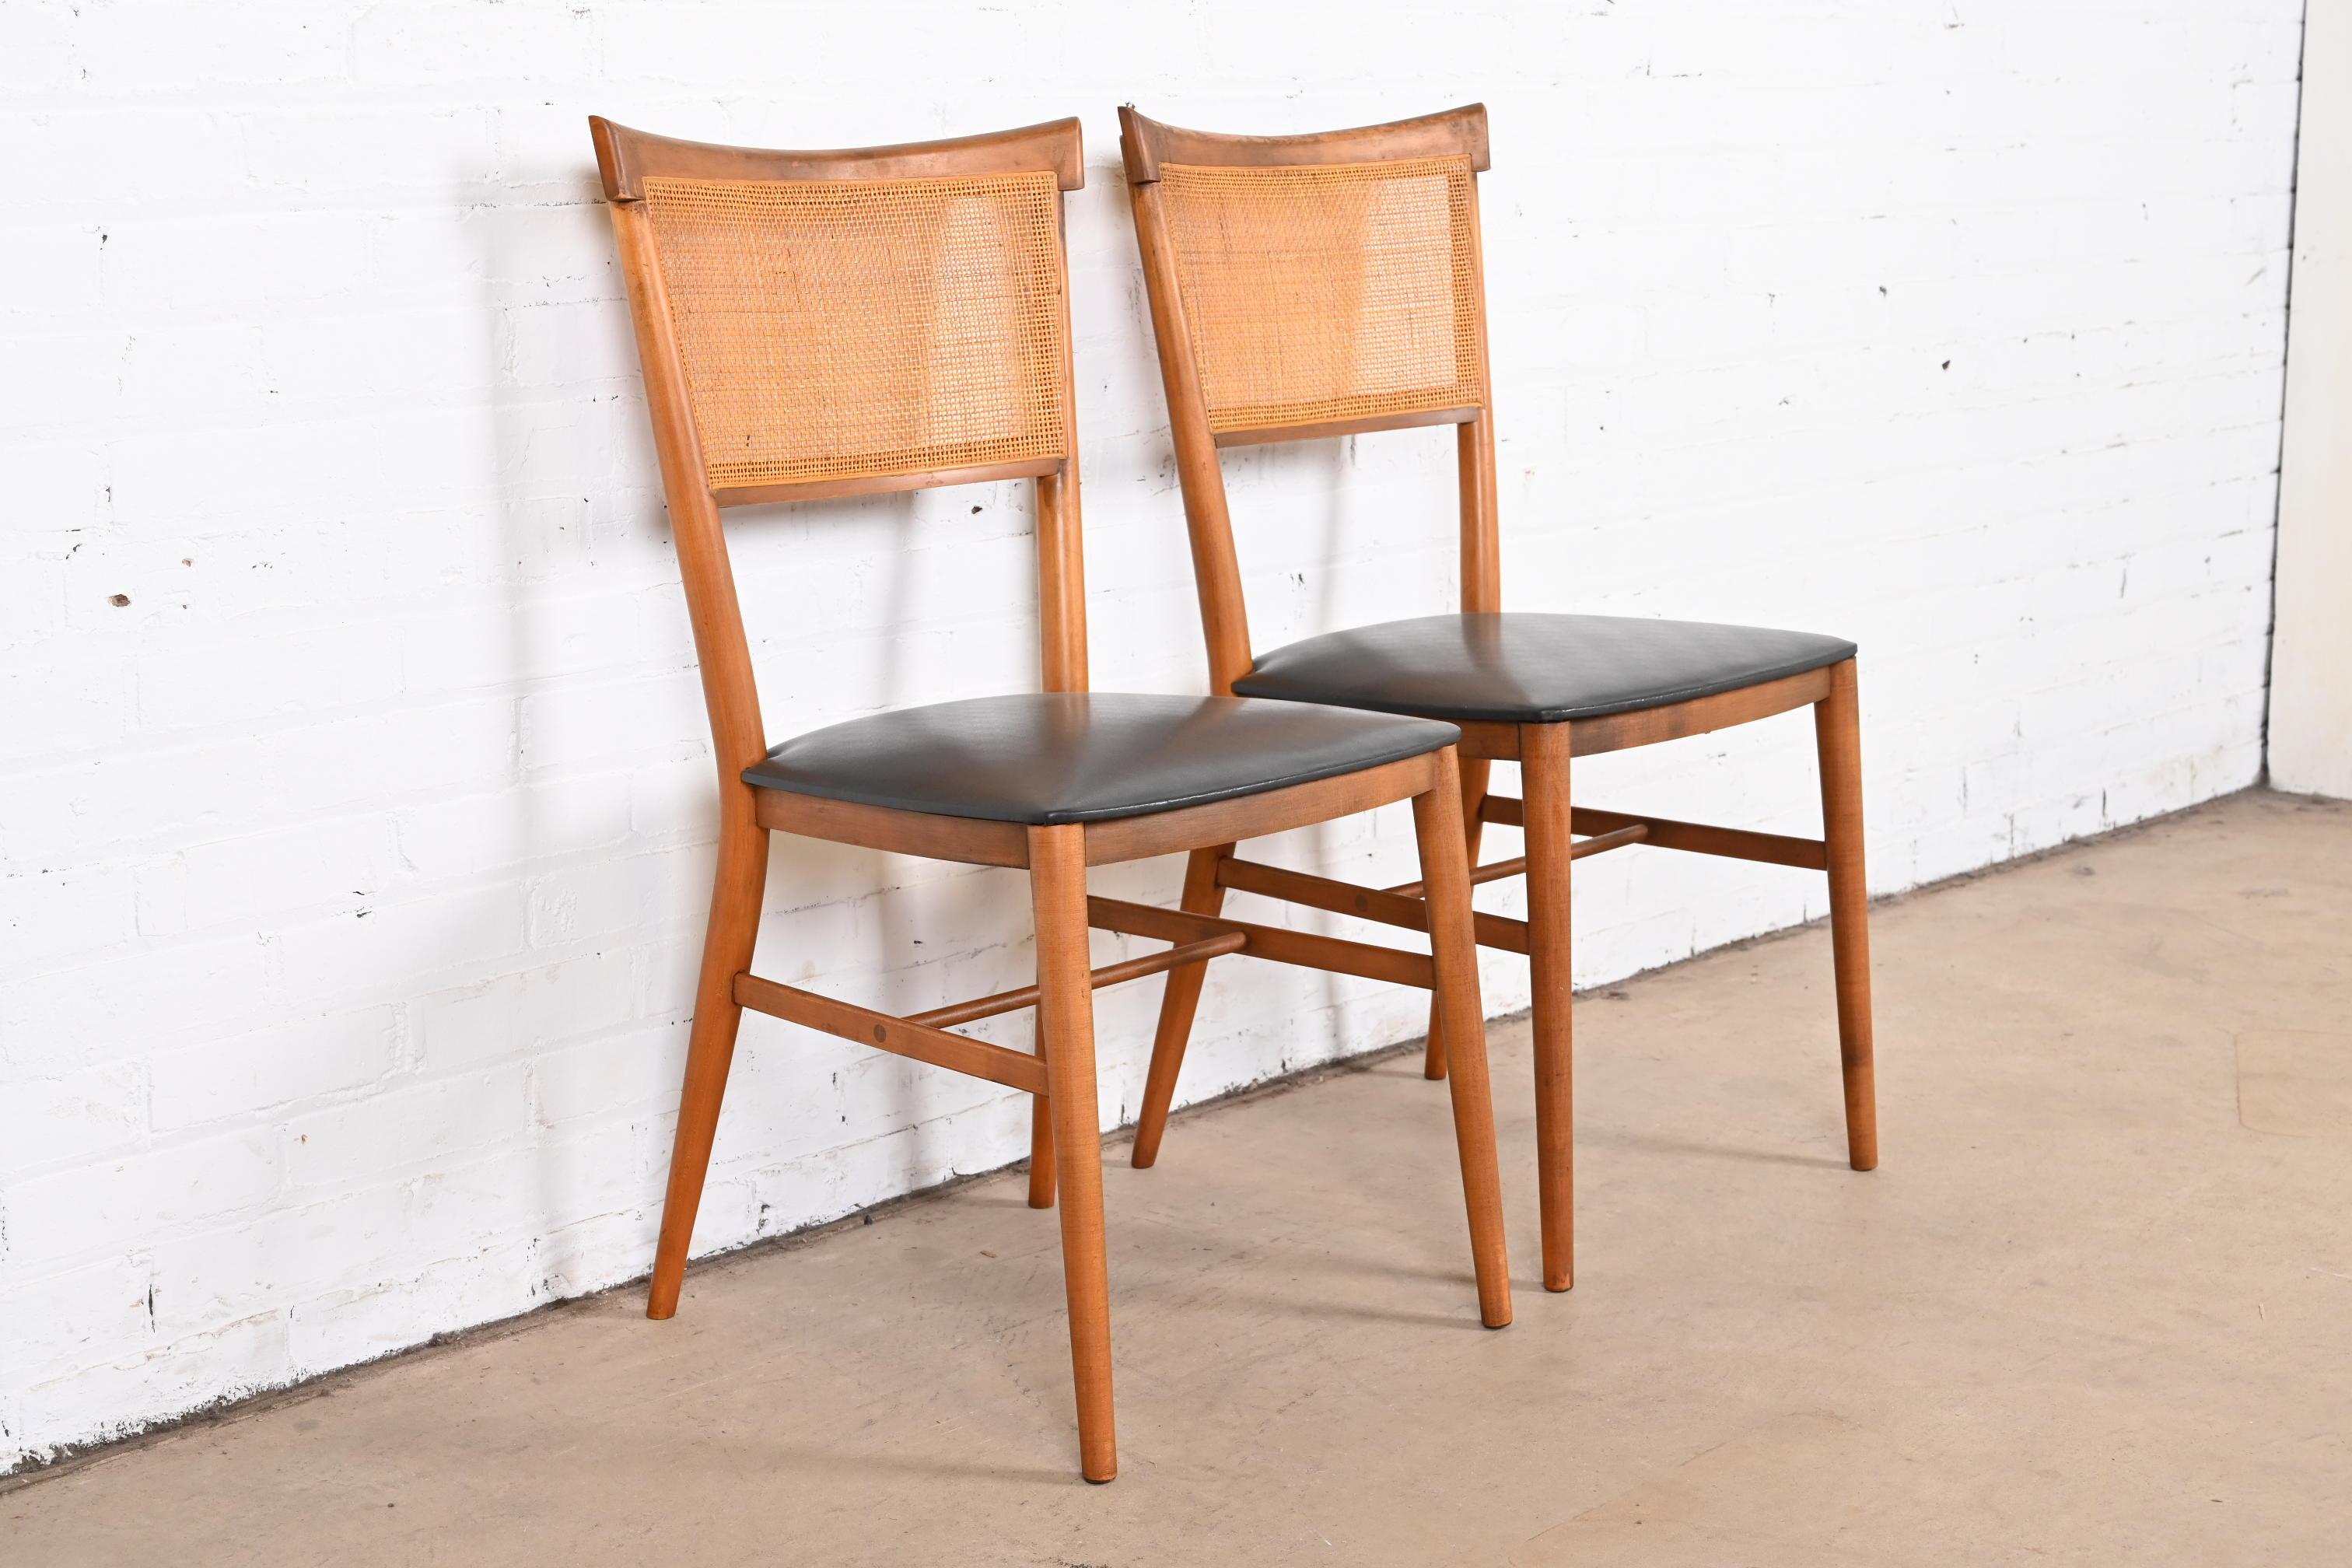 Mid-20th Century Paul McCobb Planner Group Birch and Cane Dining Chairs or Side Chairs, Pair